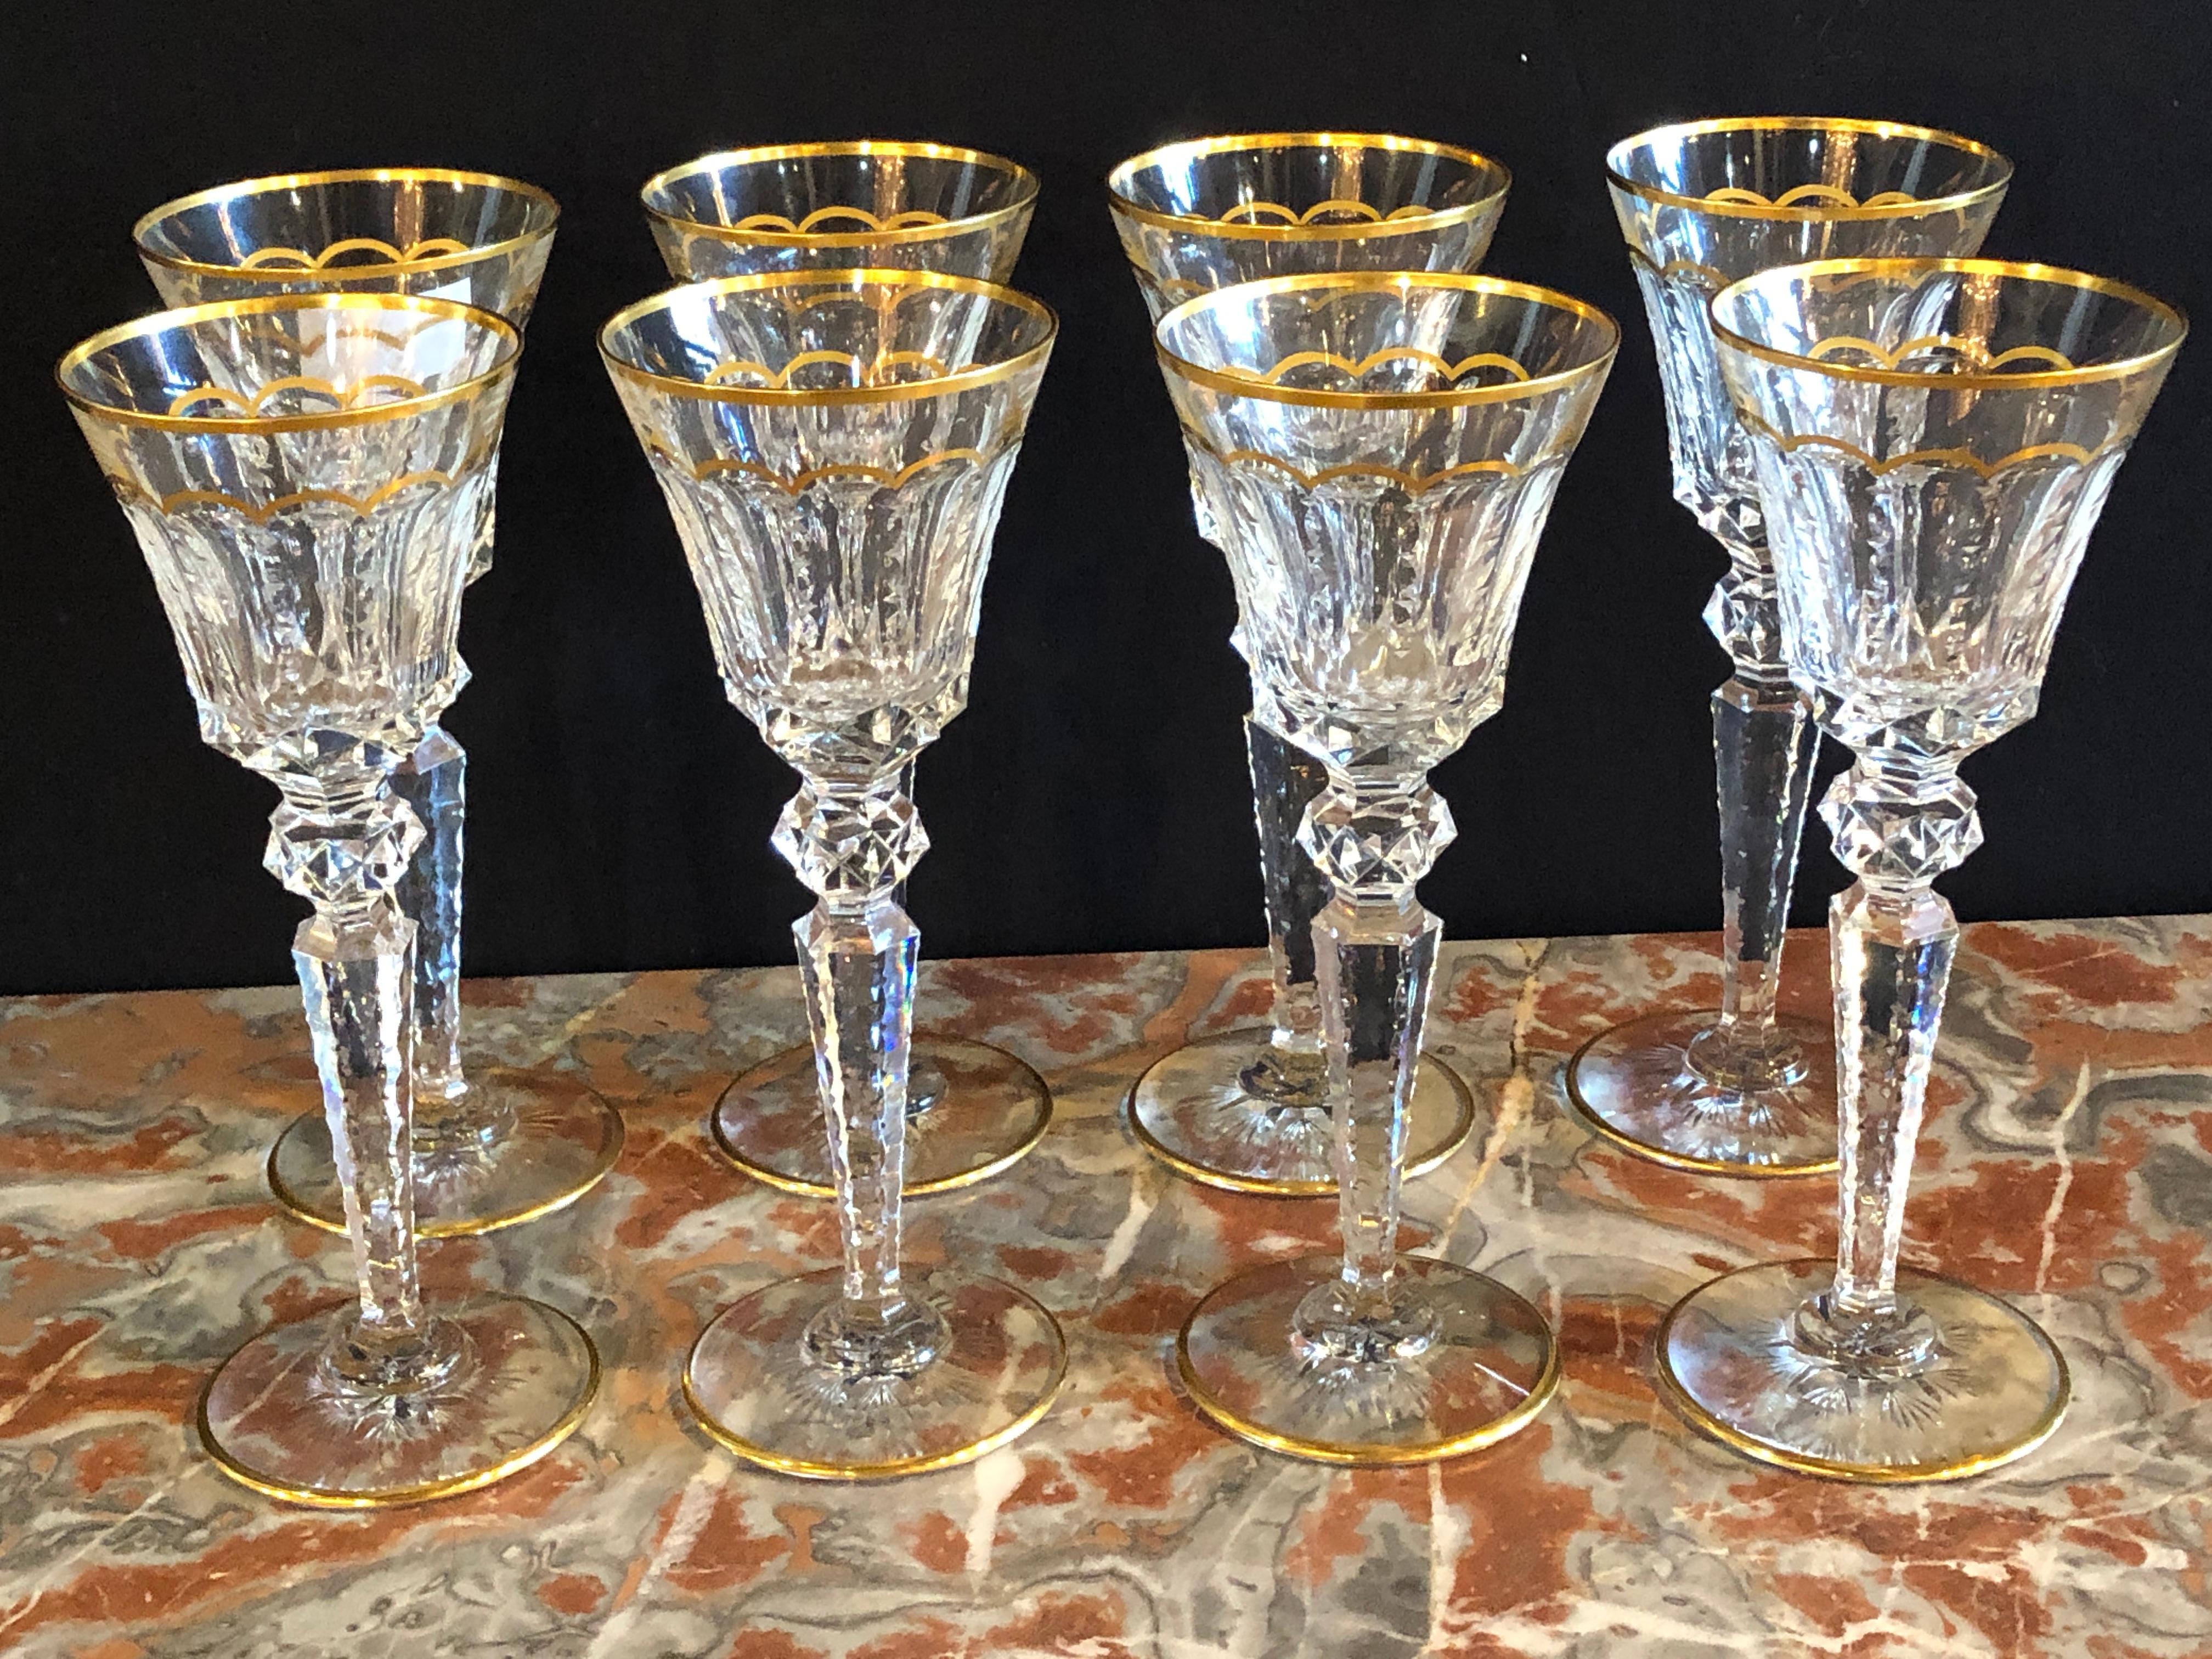 Vintage St. Louis crystal set of eight mouth blown and hand engraved / all watermarked, circa 1967, St. Louis Crystal, France. Magnificently tall, these stunning St. Louis water goblets in the renowned “Excellence” pattern feature a detailed handcut